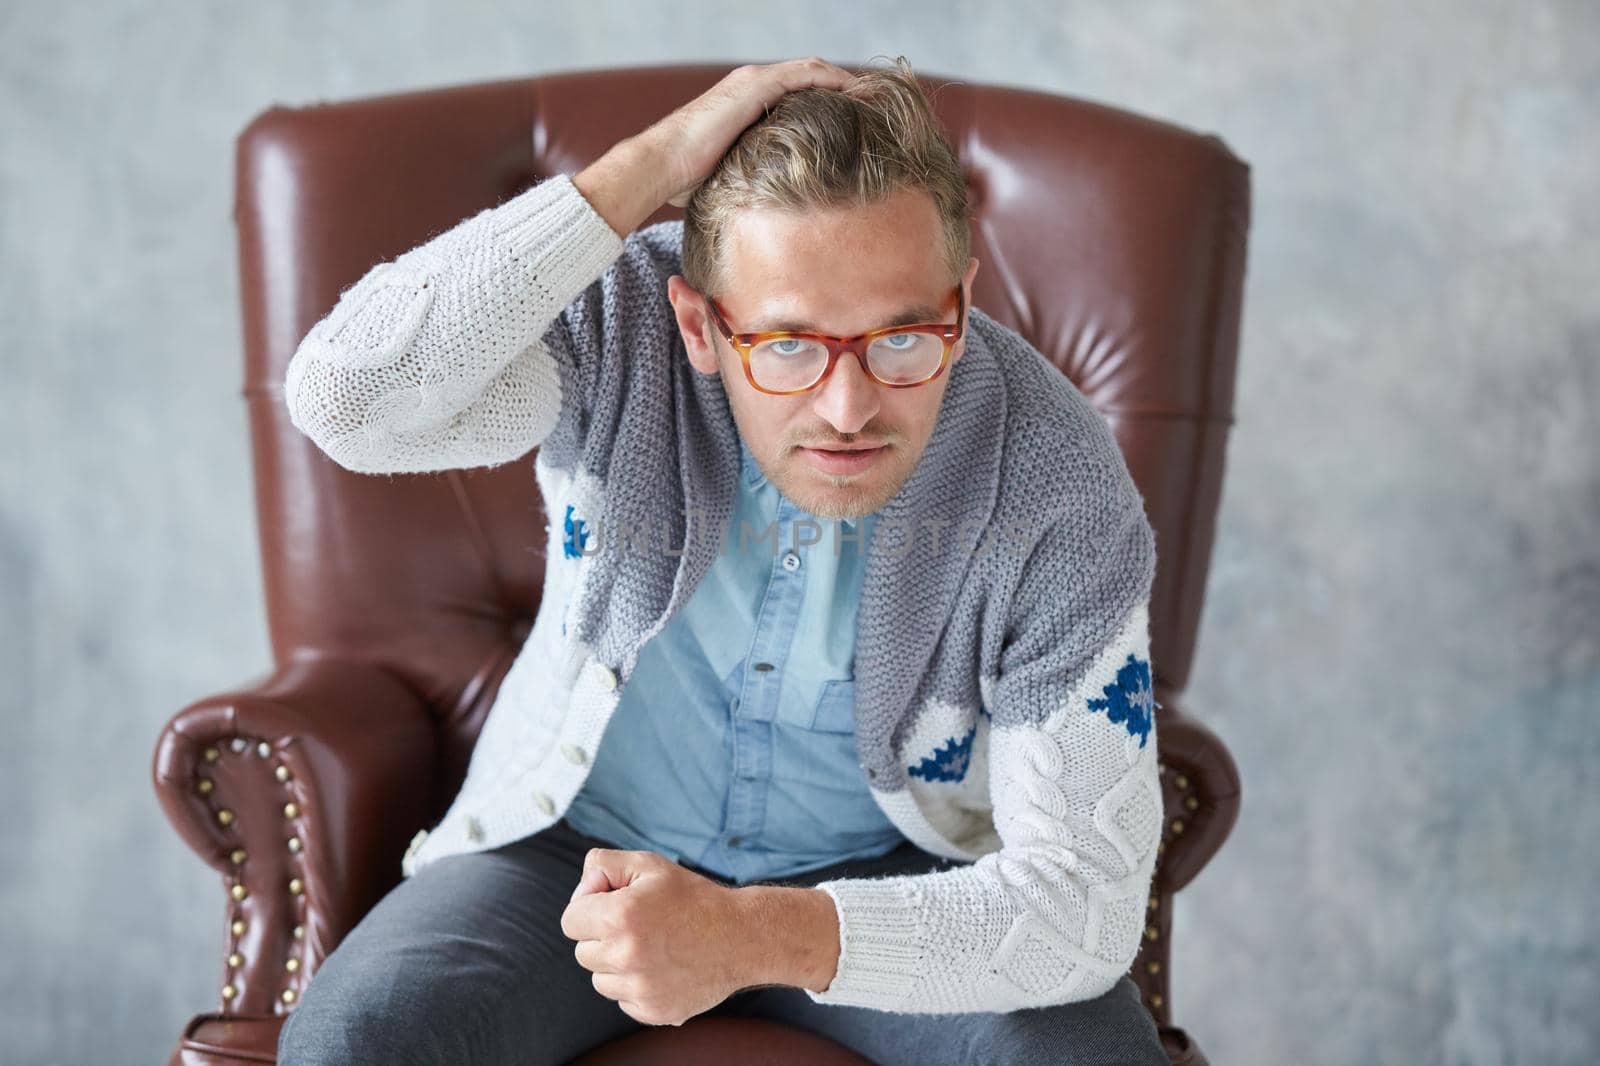 Portrait of a stylish intelligent man with glasses stares into the camera, good view, small unshaven, charismatic, blue shirt, gray sweater, sitting on a brown leather chair. High quality photo